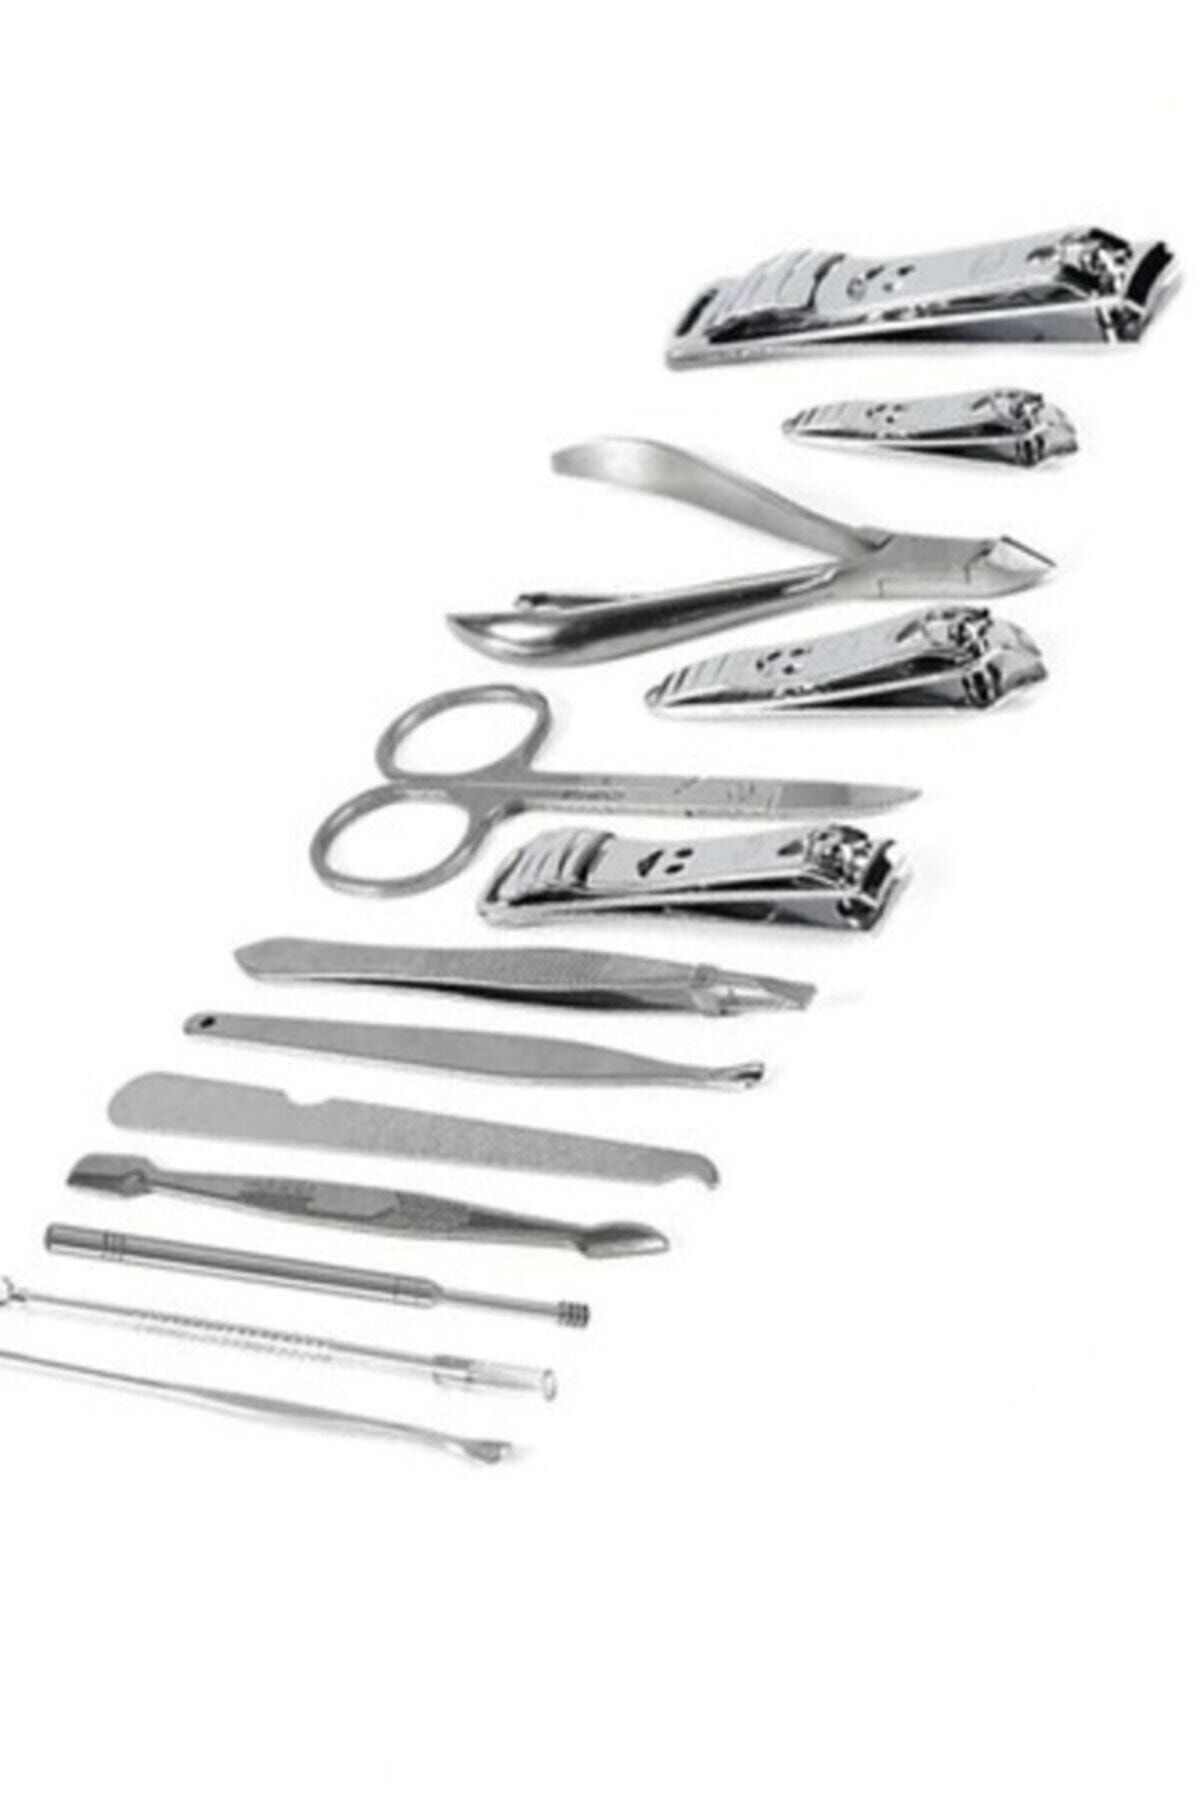 Manicure Accessories Scissors Nail Clippers Hair Stock Photo 2337793609 |  Shutterstock